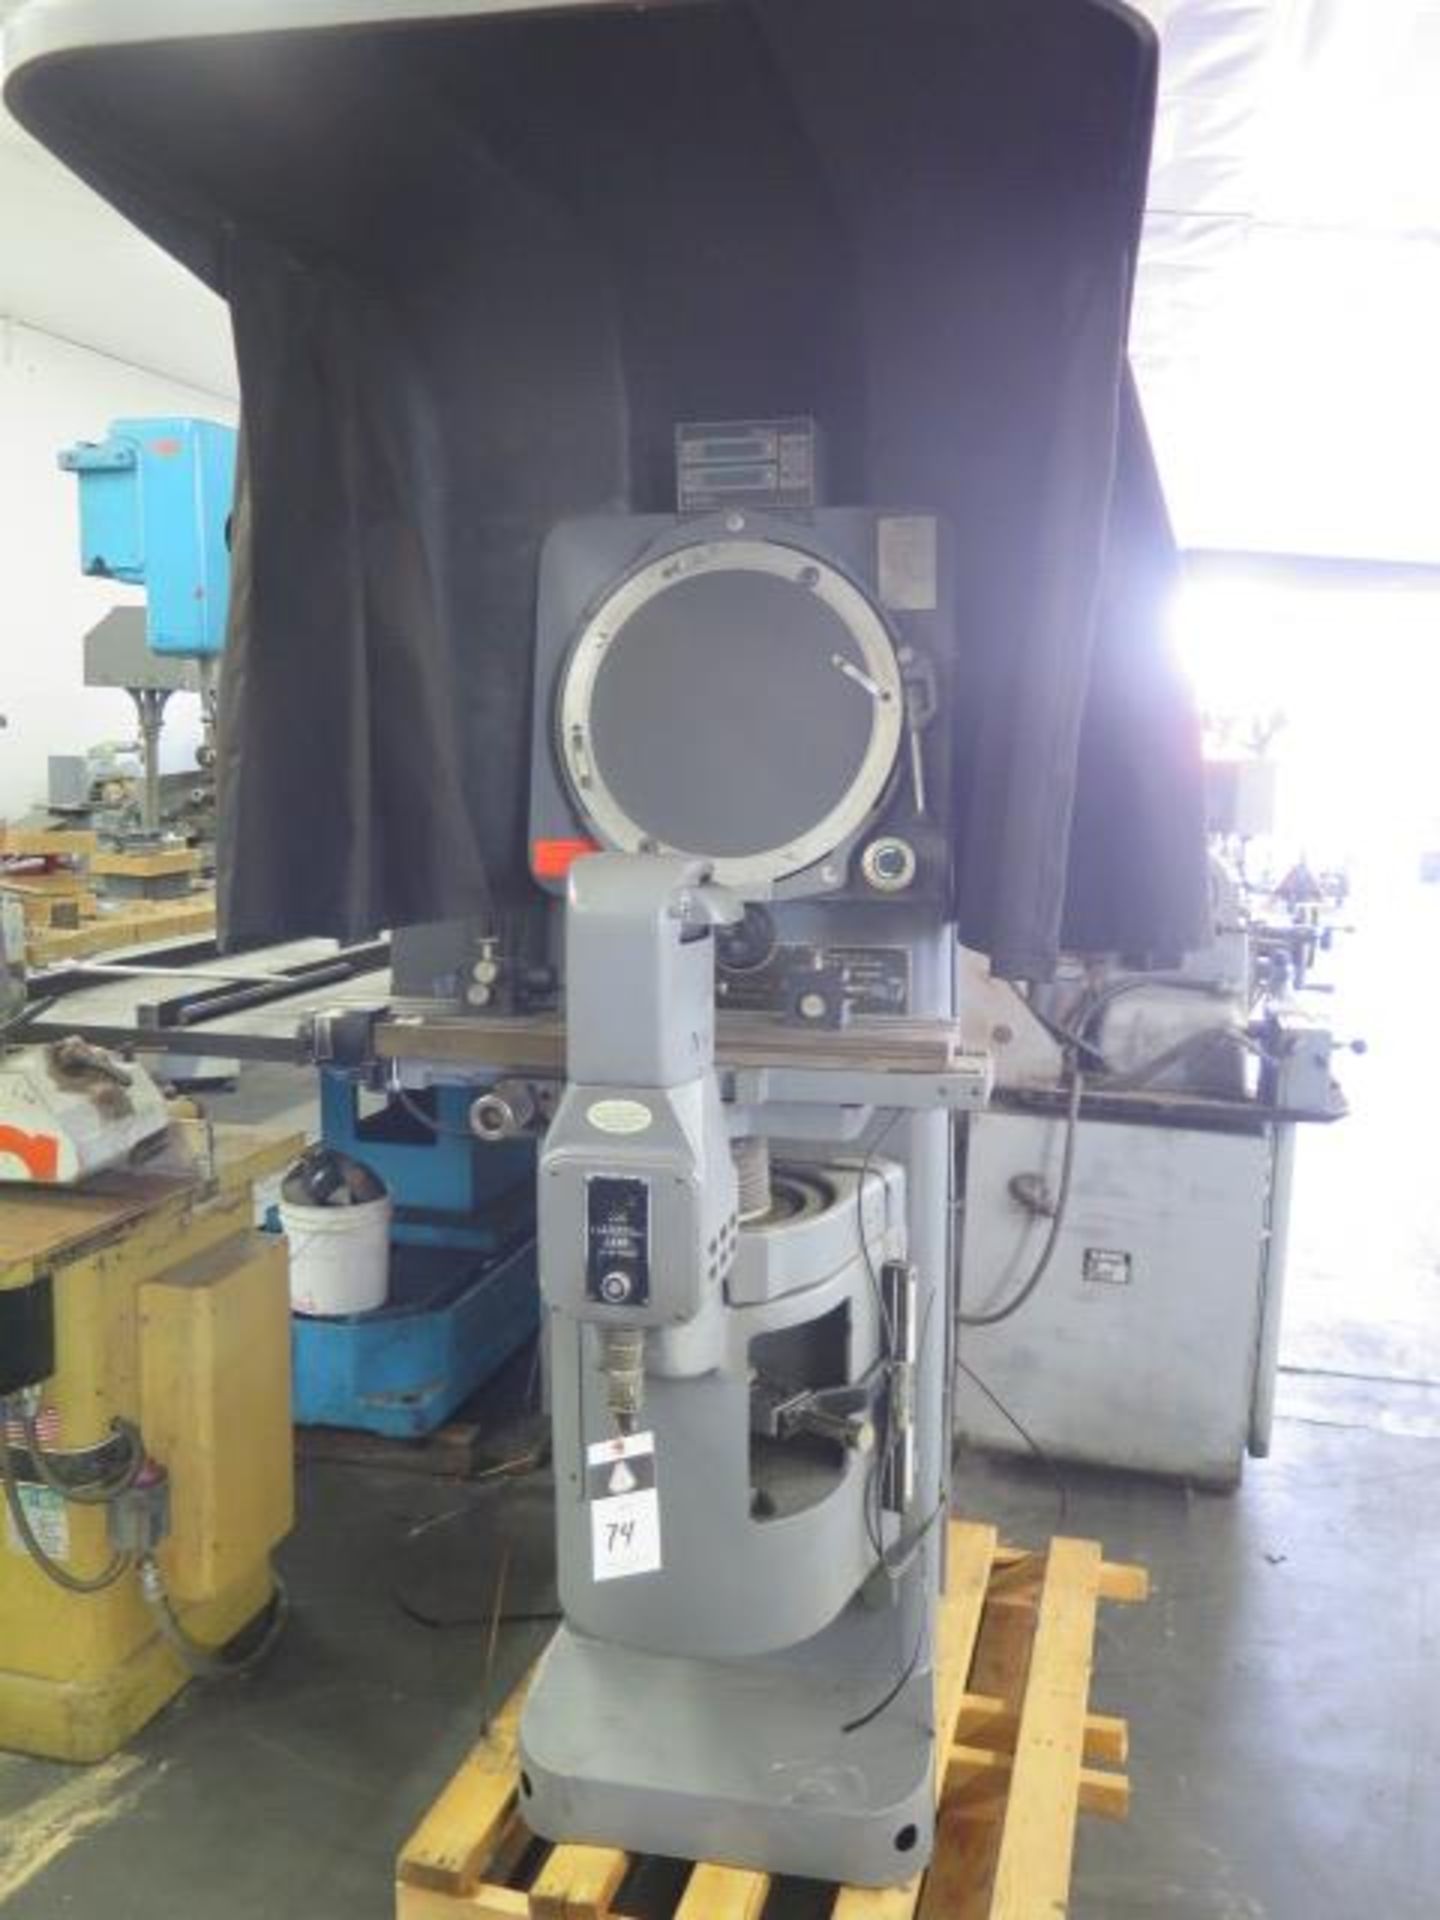 J & L PC-14 14" Floor Model Optical Comparator w/ Acu-Rite Quickcount DRO, SOLD AS-IS - NO